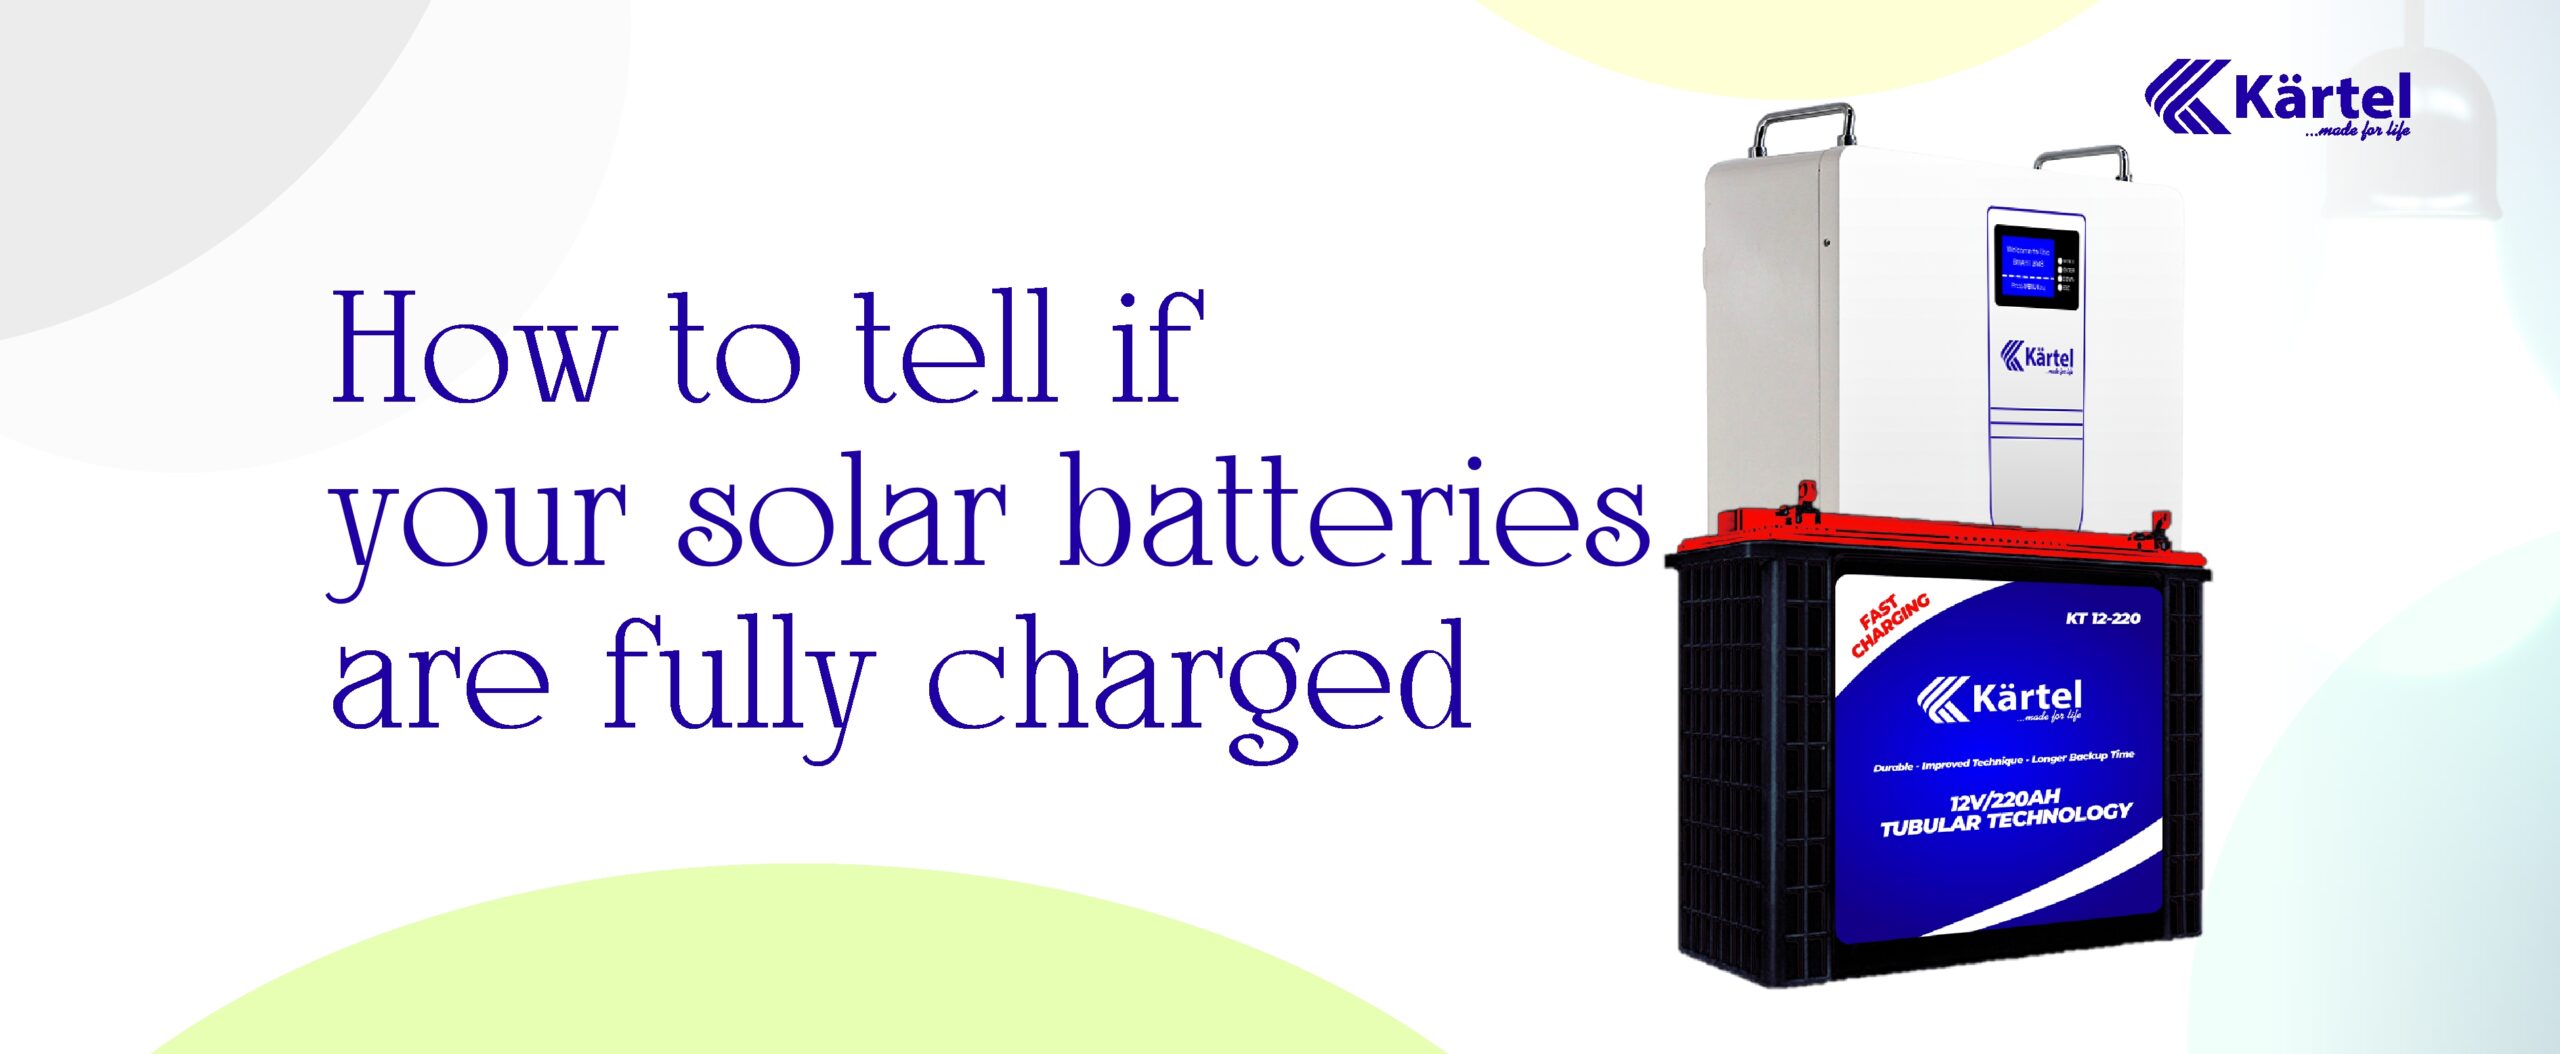 how-to-tell-if-your-solar-batteries-are-fully-charged